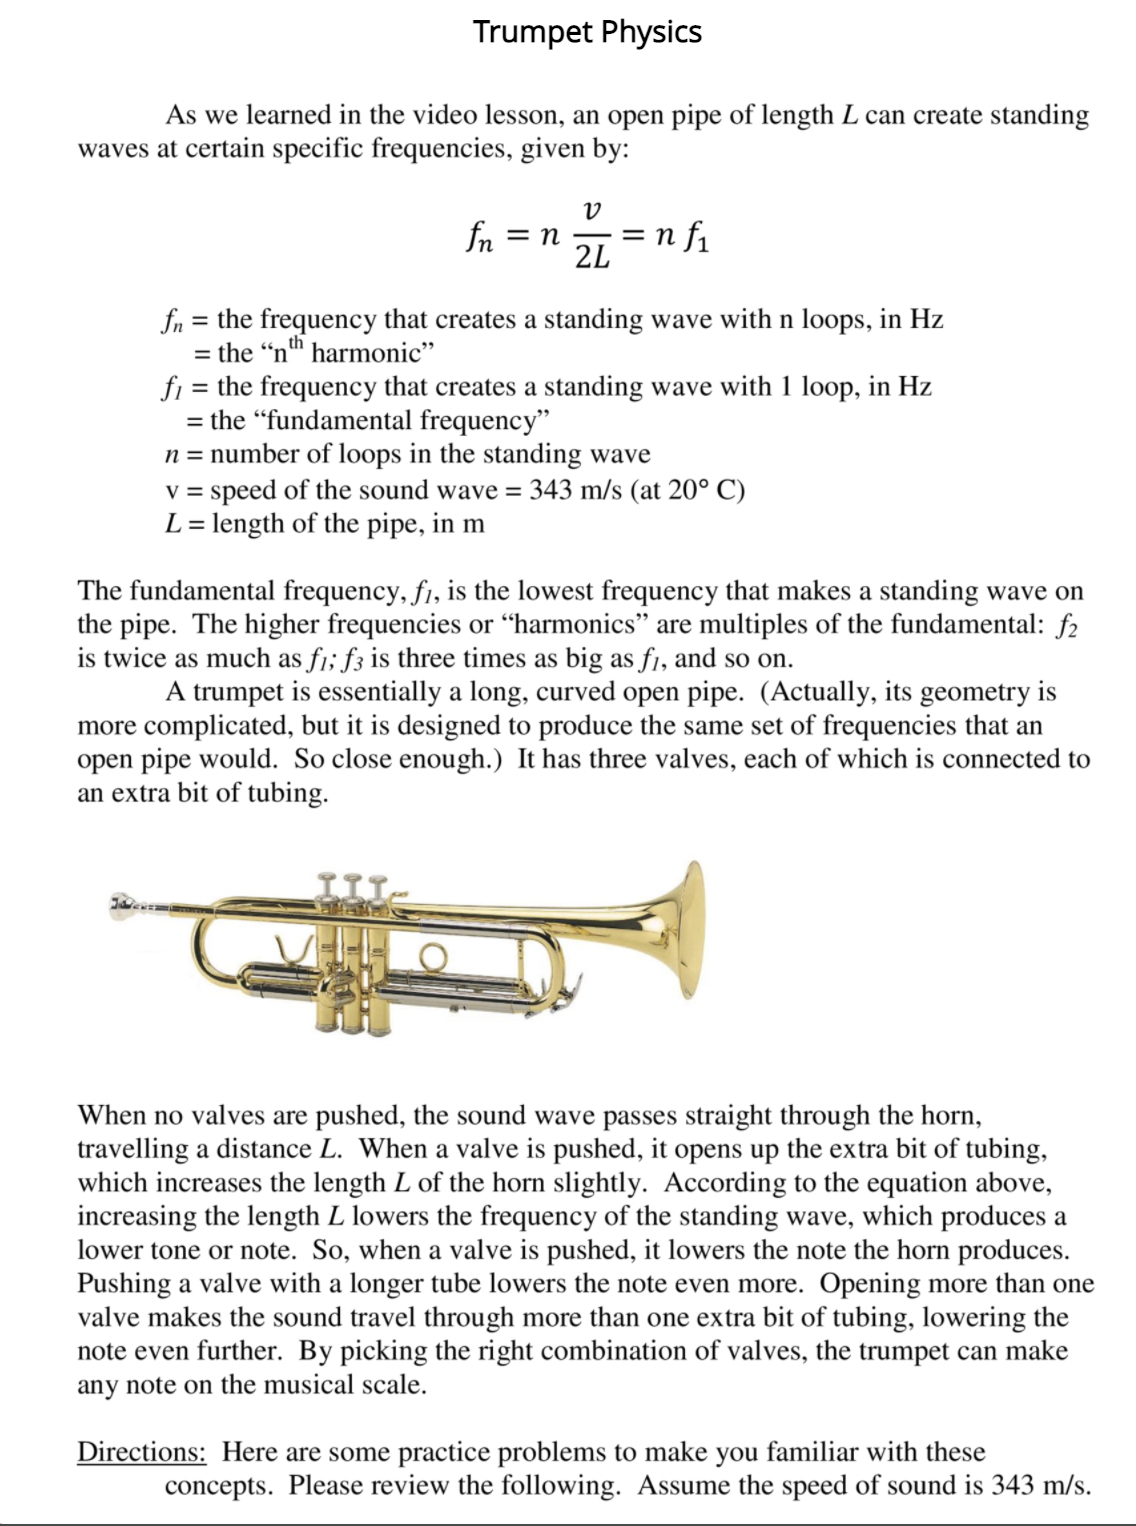 Trumpet Physics
As we learned in the video lesson, an open pipe of length L can create standing
waves at certain specific frequencies, given by:
fn
= n f1
2L
= n
fn = the frequency that creates a standing wave with n loops, in Hz
= the "nth harmonic"
fi = the frequency that creates a standing wave with 1 loop, in Hz
= the "fundamental frequency"
n = number of loops in the standing wave
v = speed of the sound wave = 343 m/s (at 20° C)
L= length of the pipe, in m
%3D
The fundamental frequency, f1, is the lowest frequency that makes a standing wave on
the pipe. The higher frequencies or “harmonics" are multiples of the fundamental: f2
is twice as much as f1; f3 is three times as big as f1, and so on.
A trumpet is essentially a long, curved open pipe. (Actually, its geometry is
more complicated, but it is designed to produce the same set of frequencies that an
open pipe would. So close enough.) It has three valves, each of which is connected to
an extra bit of tubing.
When no valves are pushed, the sound wave passes straight through the horn,
travelling a distance L. When a valve is pushed, it opens up the extra bit of tubing,
which increases the length L of the horn slightly. According to the equation above,
increasing the length L lowers the frequency of the standing wave, which produces a
lower tone or note. So, when a valve is pushed, it lowers the note the horn produces.
Pushing a valve with a longer tube lowers the note even more. Opening more than one
valve makes the sound travel through more than one extra bit of tubing, lowering the
note even further. By picking the right combination of valves, the trumpet can make
any note on the musical scale.
Directions: Here are some practice problems to make you familiar with these
concepts. Please review the following. Assume the speed of sound is 343 m/s.
